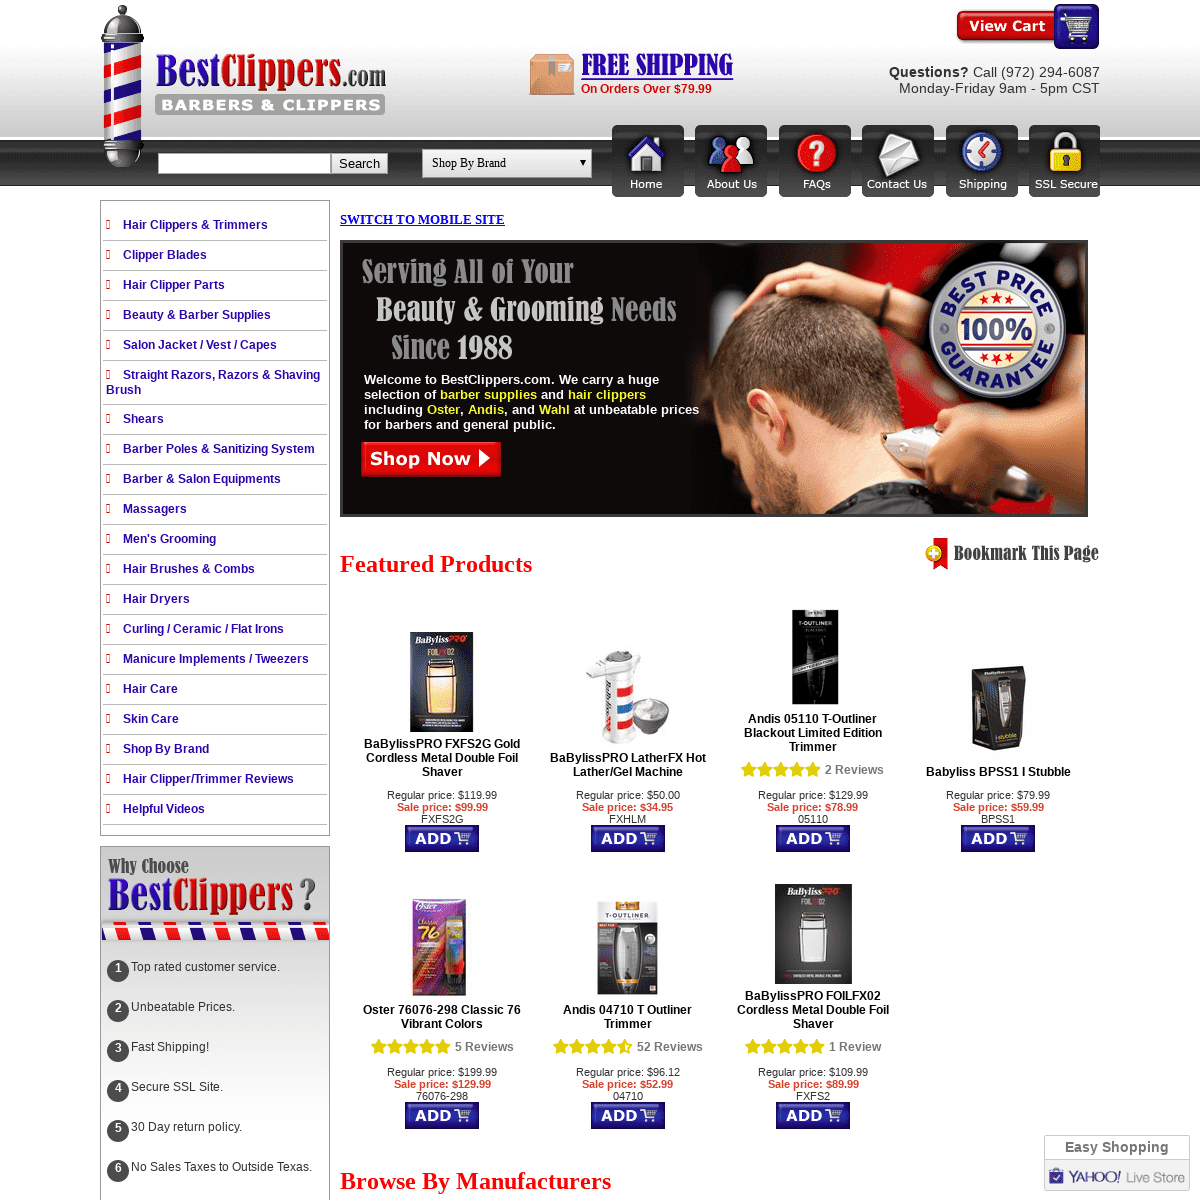 Buy barber supplies, hair clippers and trimmers like Oster, Andis, and Wahl, salon shears, skin products like Fair and White.